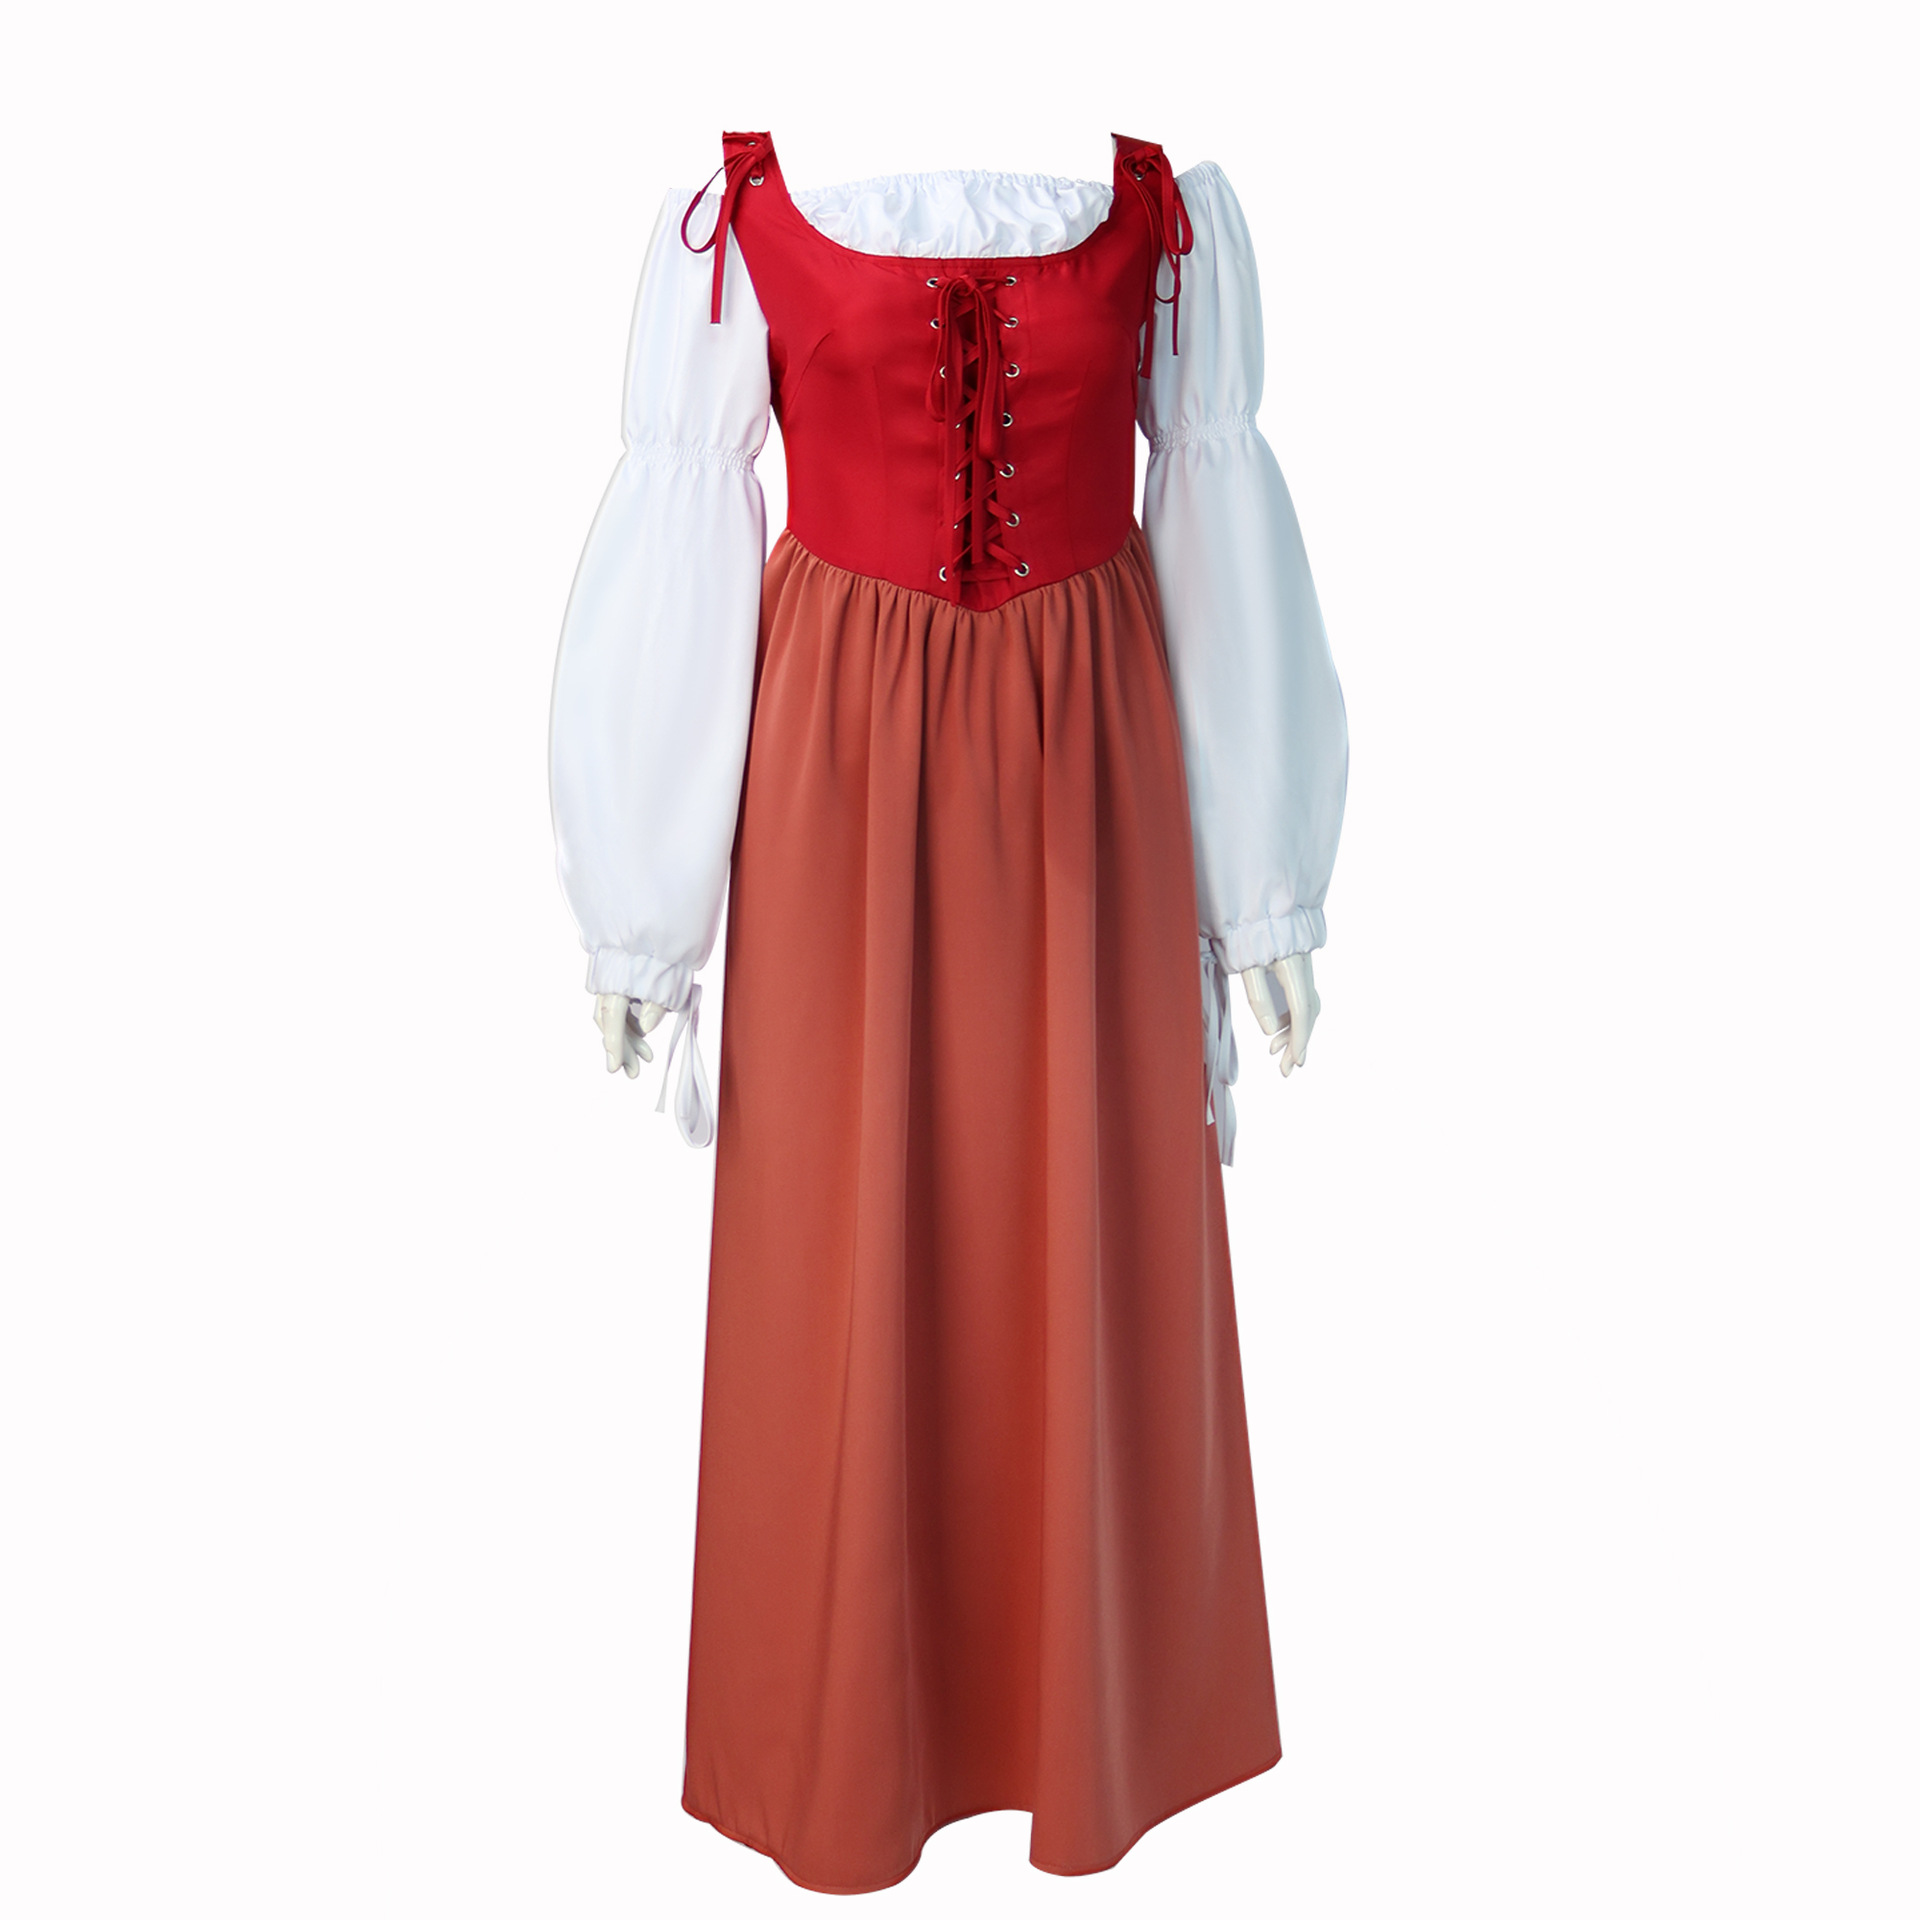 New Medieval Performance Costumes Medieval Women's Lace Dress Performance Costumes